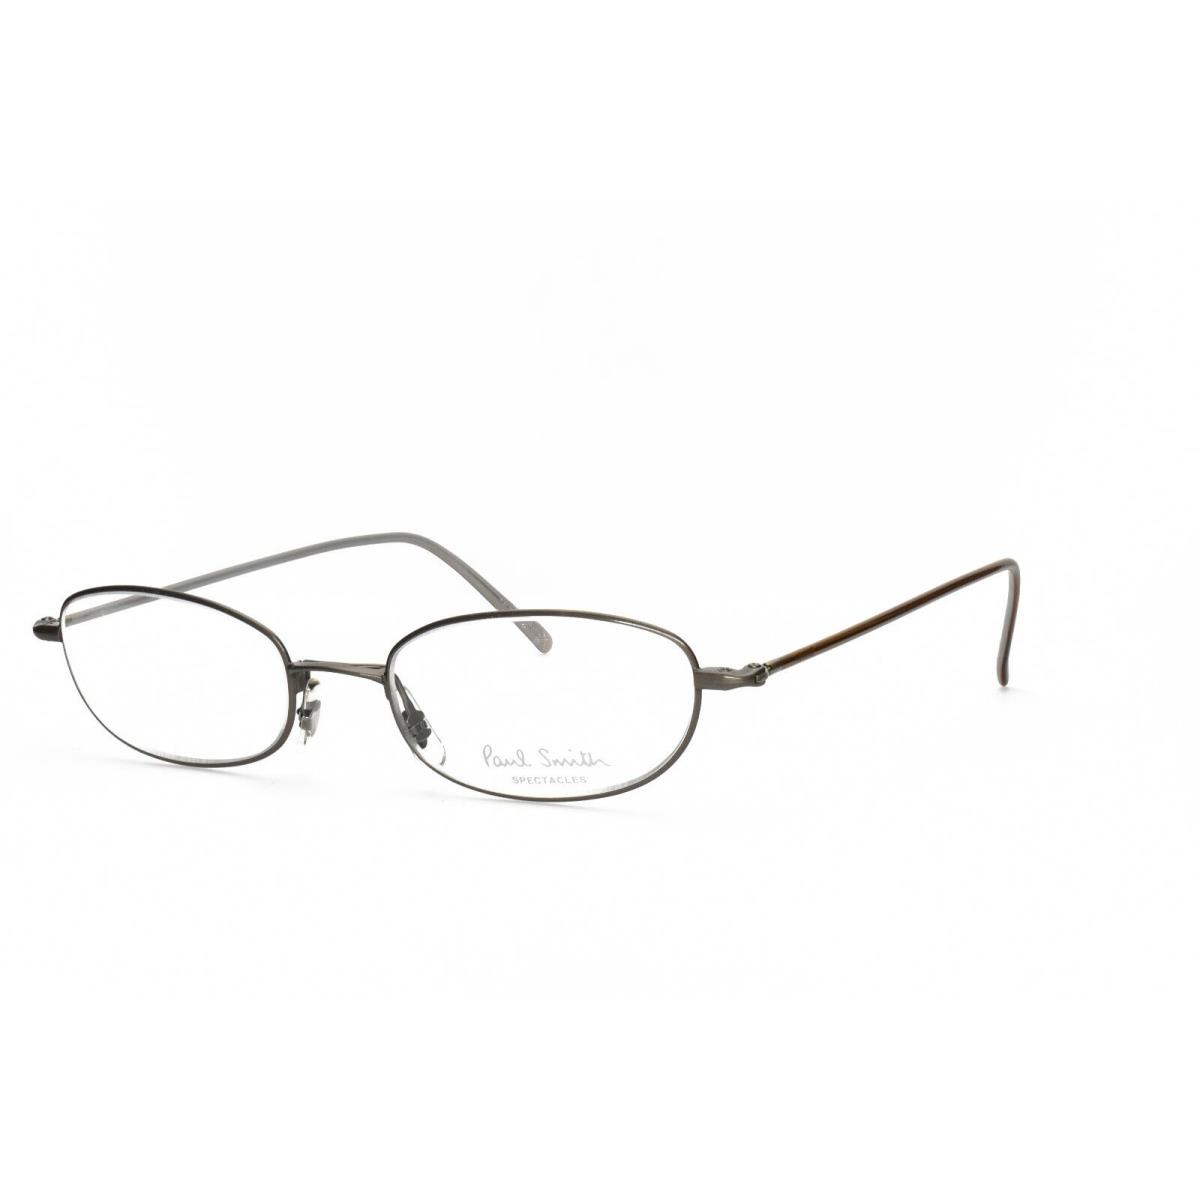 Paul Smith PS 140 FB Eyeglasses Frames Only 49-18-145